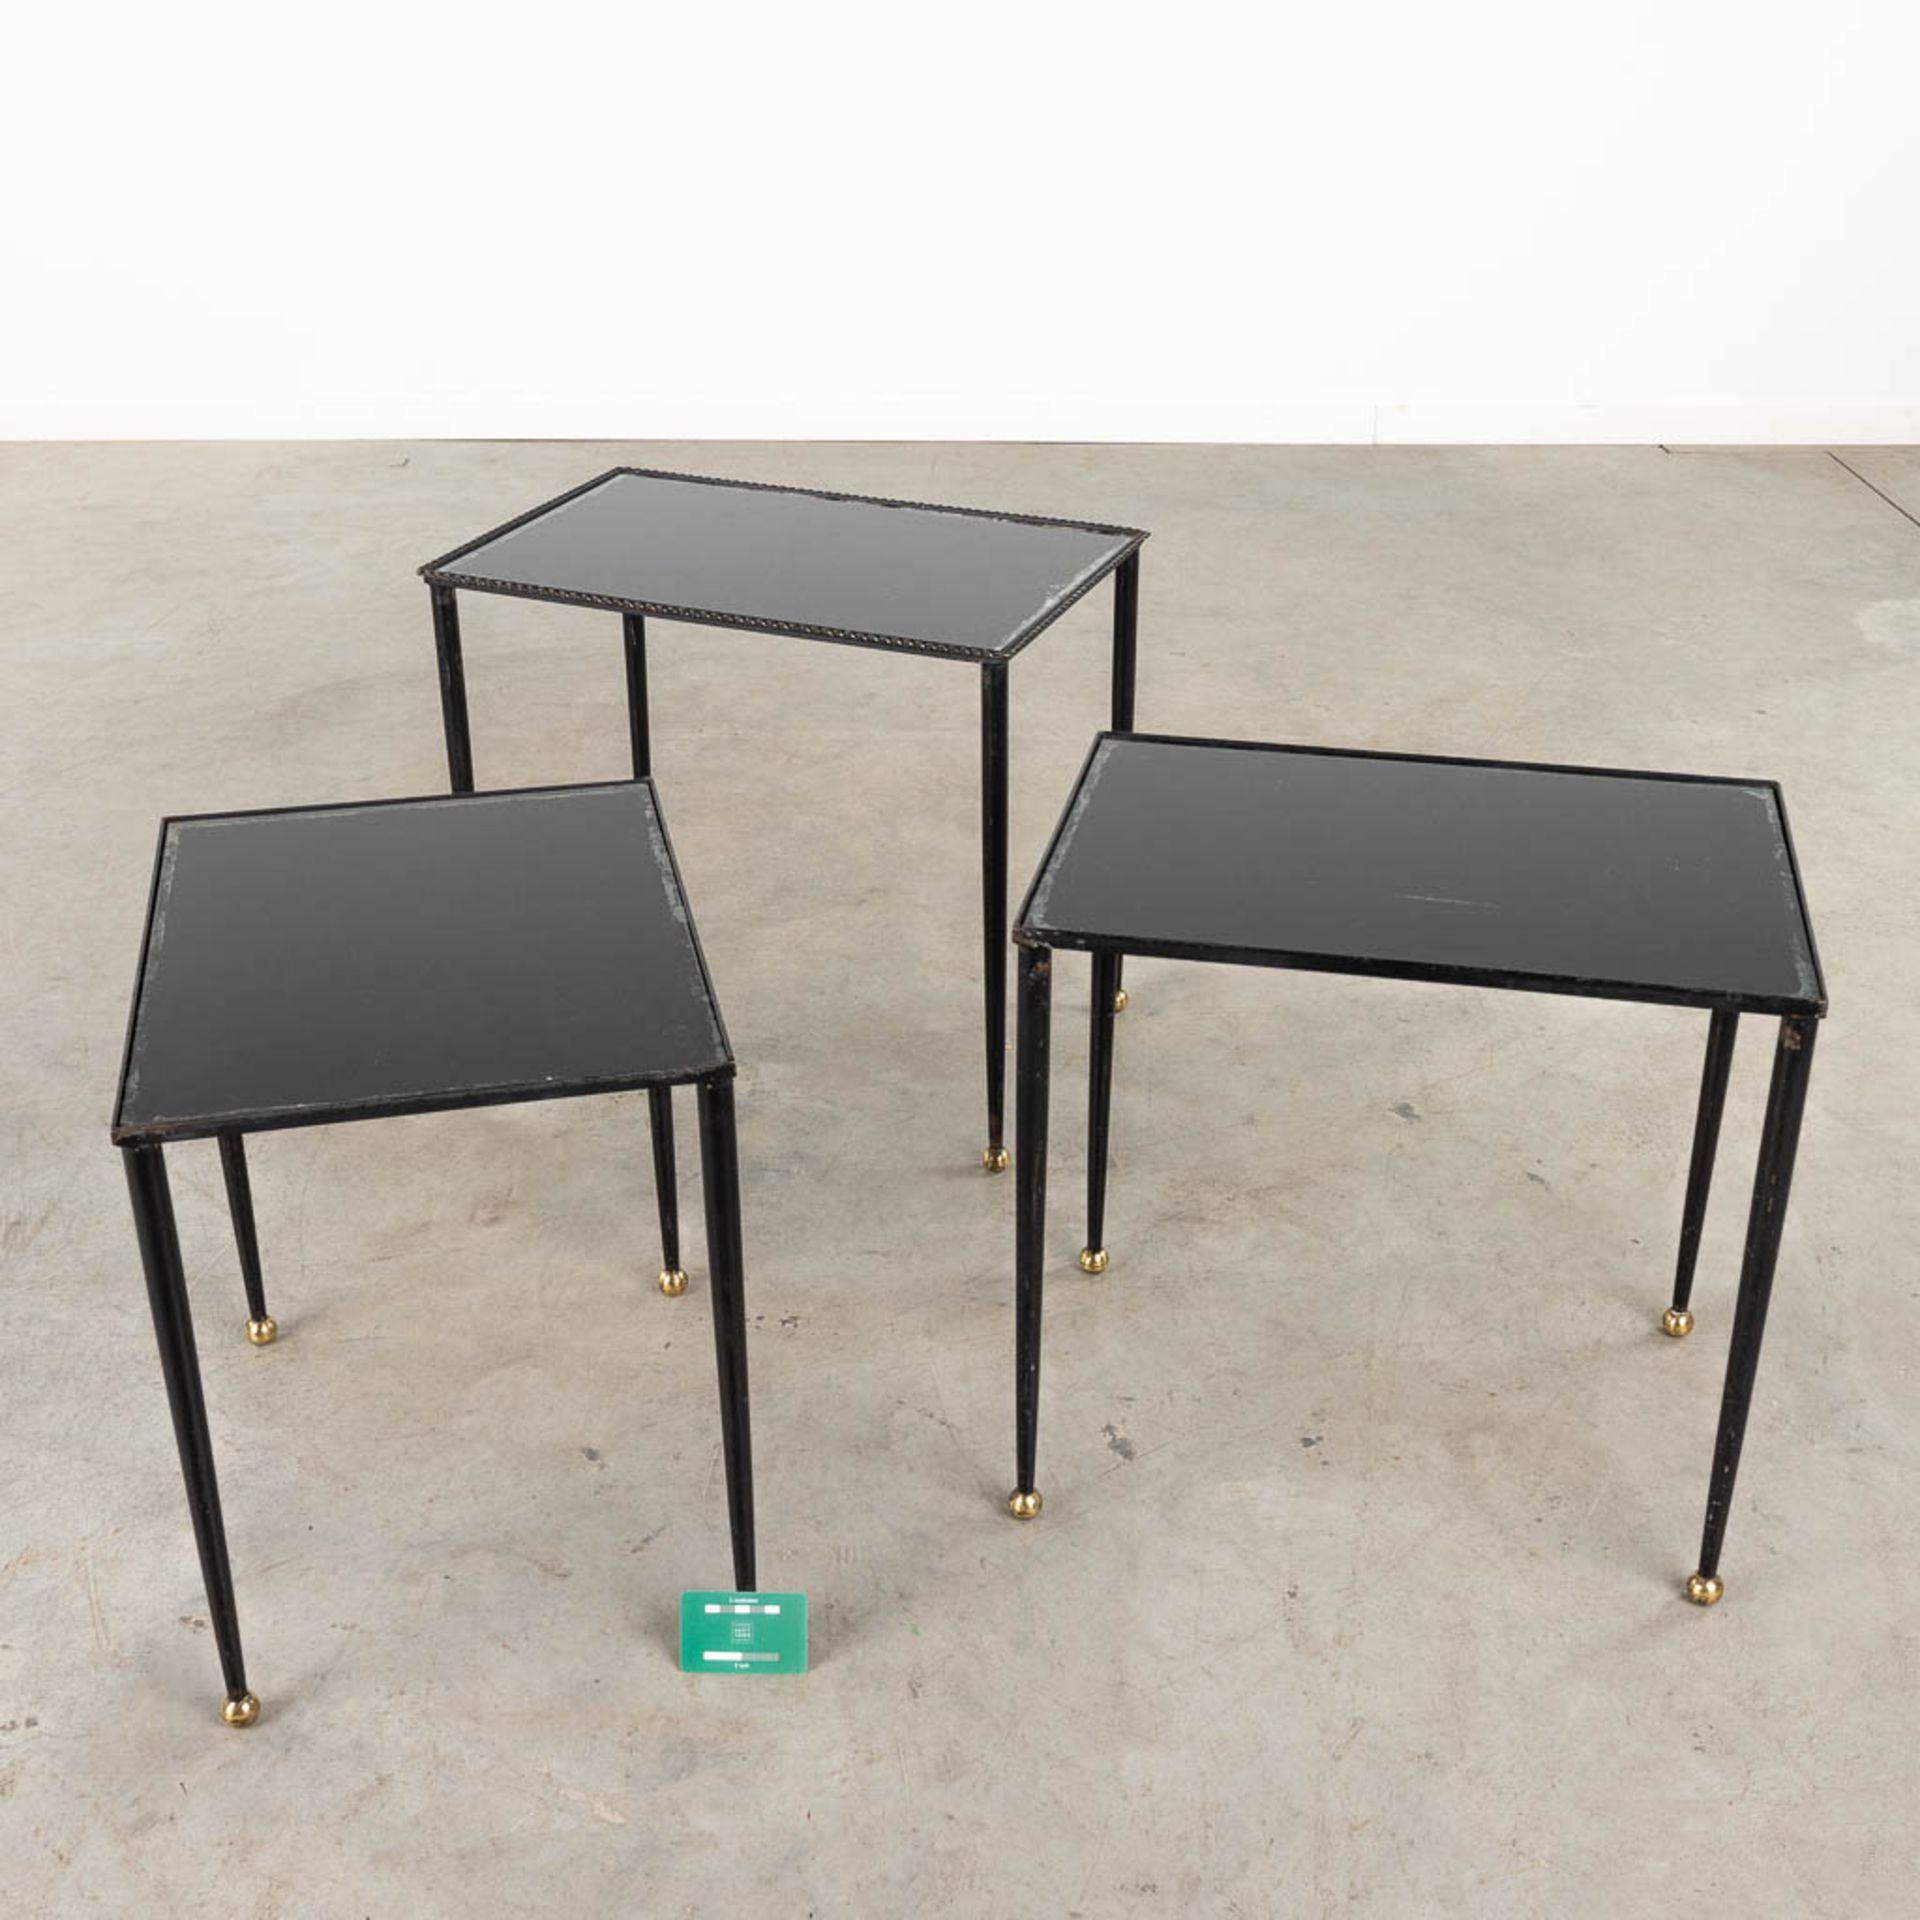 A set of Nesting tables, metal and black tinted glass. 20th C. (D:56 x W:37 x H:50 cm) - Image 2 of 10